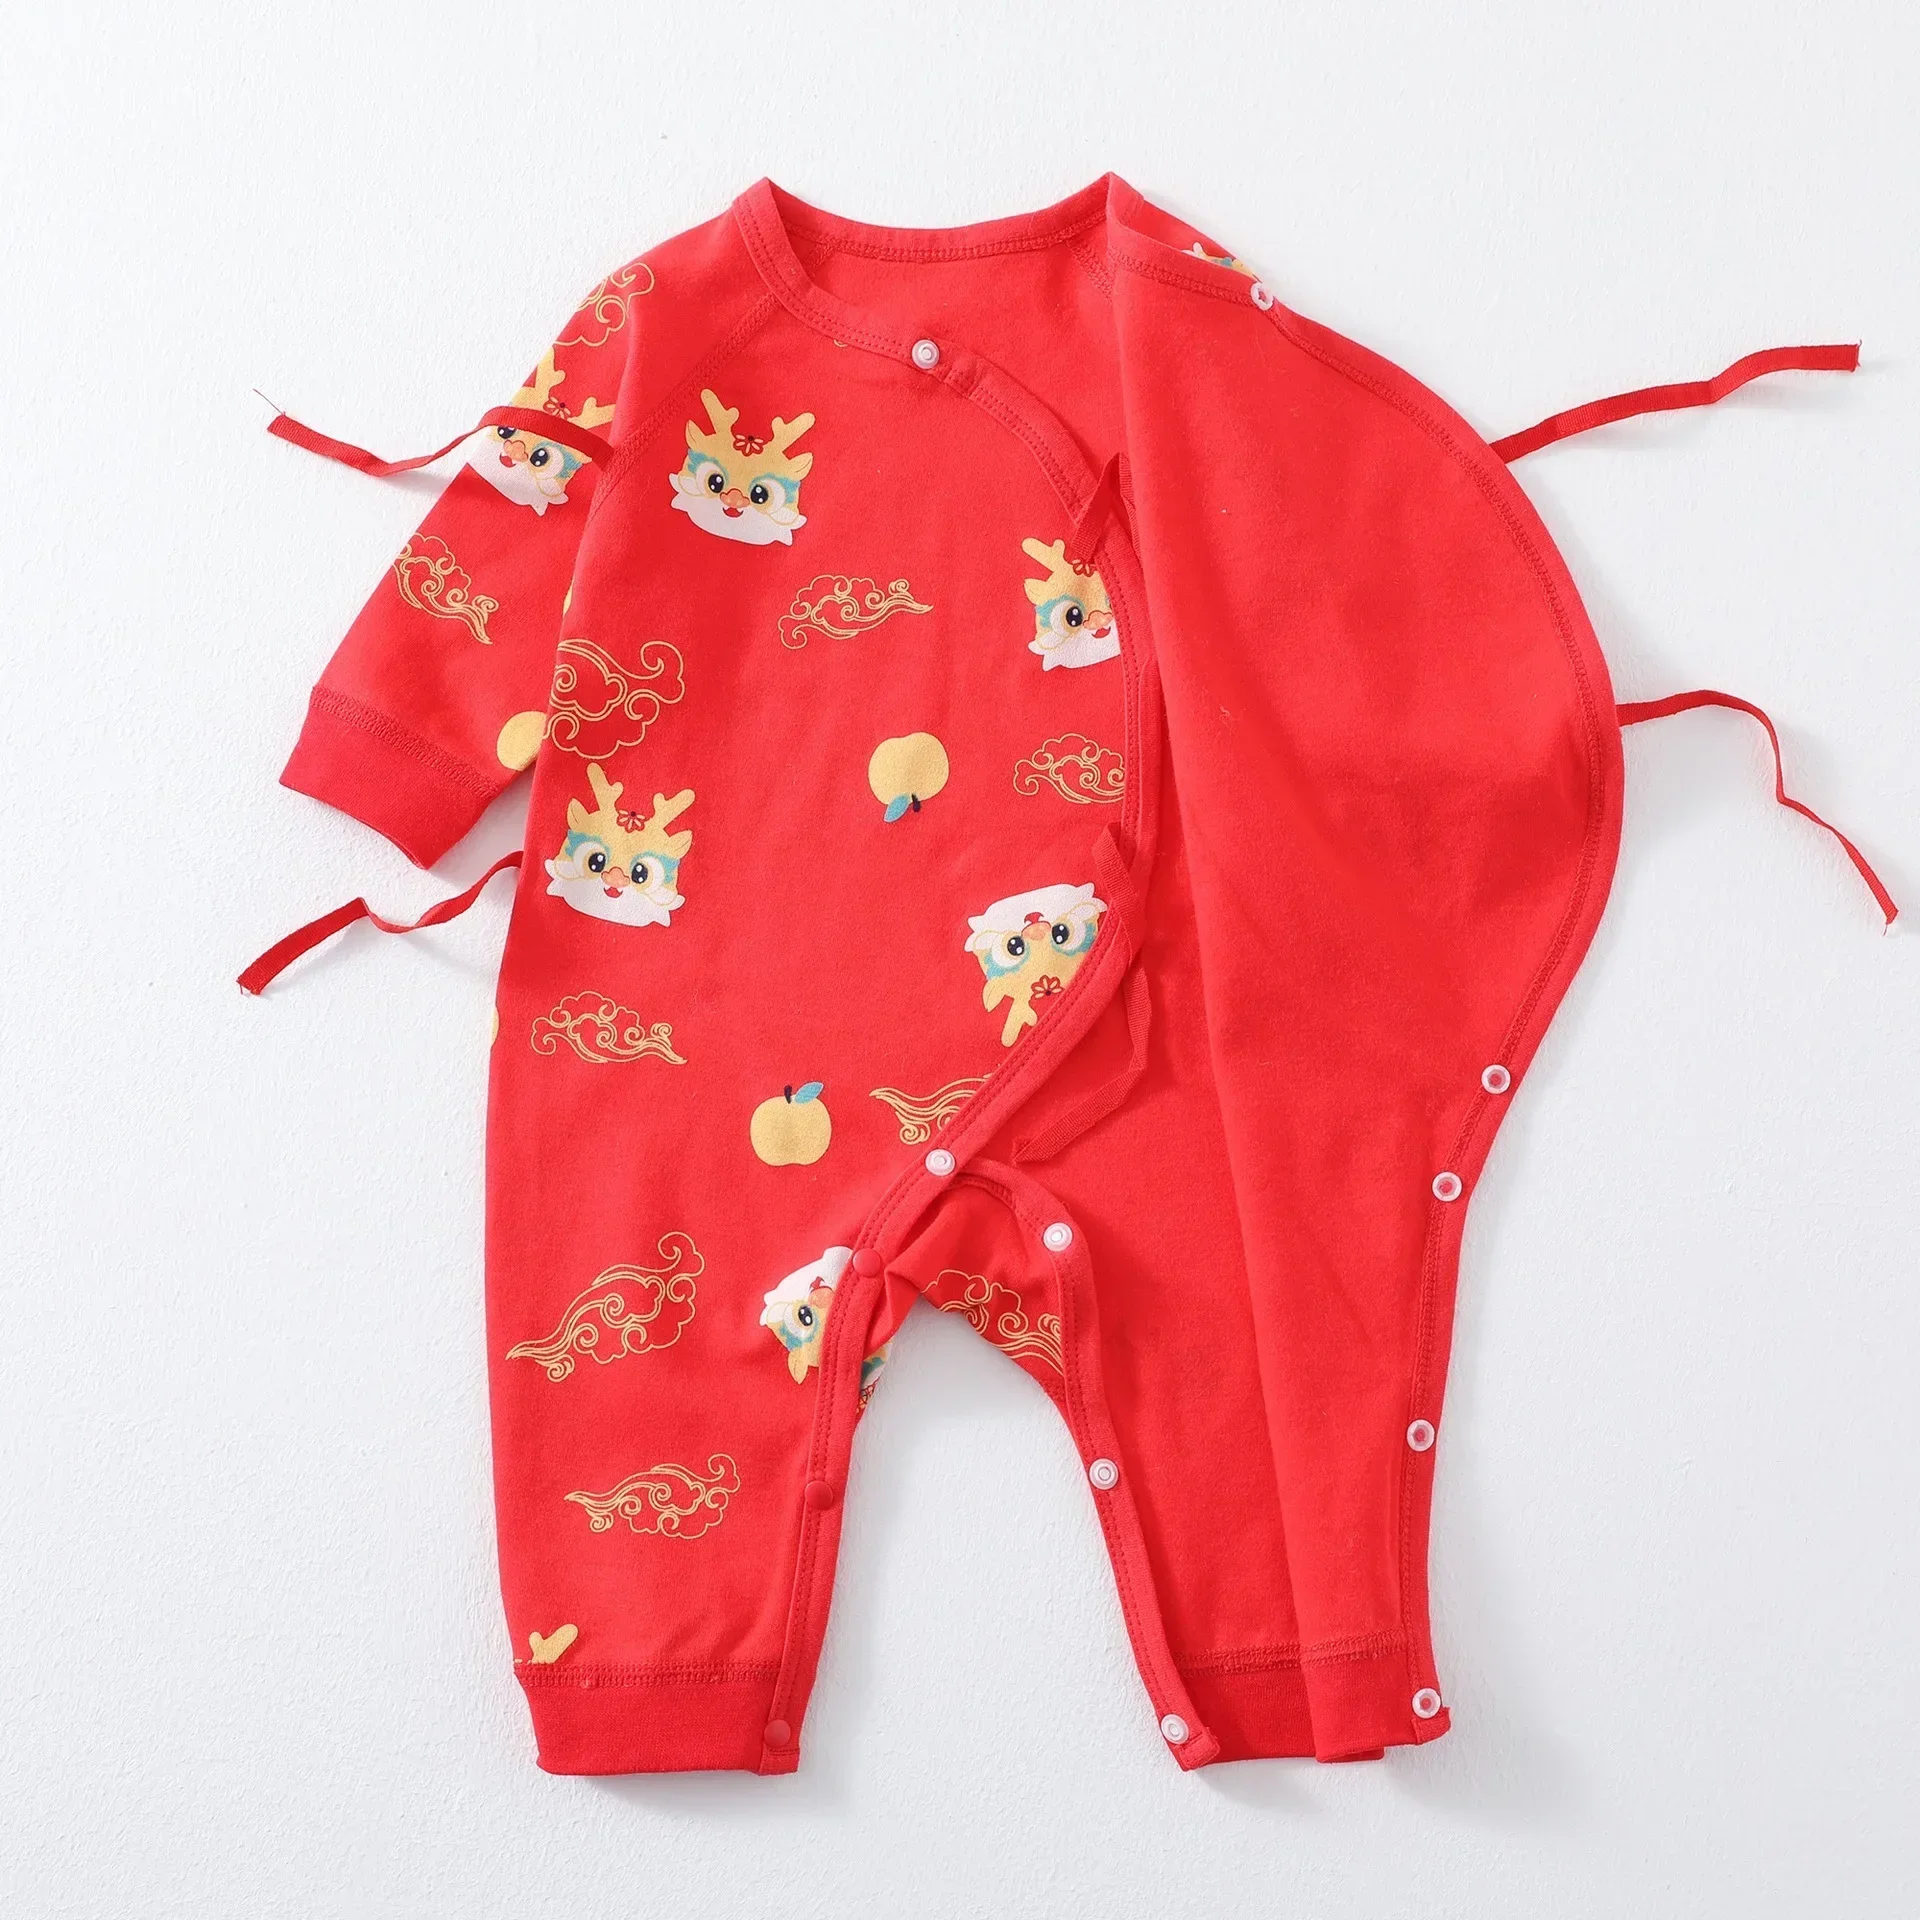 Baby Clothes Red Cotton Chinese New Year Full Month Birthday Autumn Newborn Romper Pajamas Crawling Dragon Tang Suit Jumpsuit